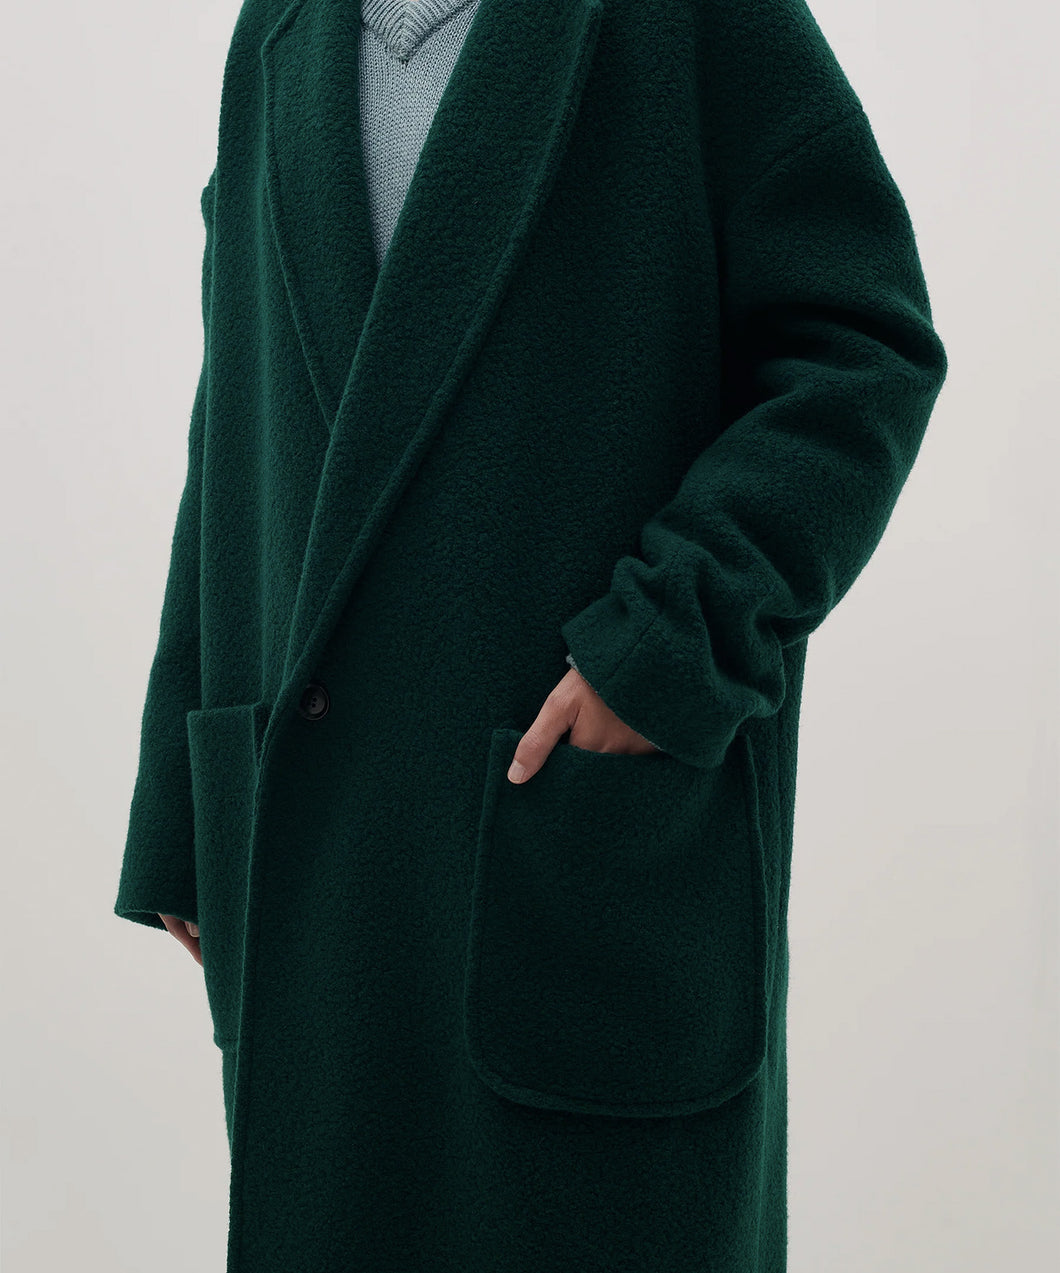 30% off with code TAKE30 - woollen classic coat DEEP FOREST